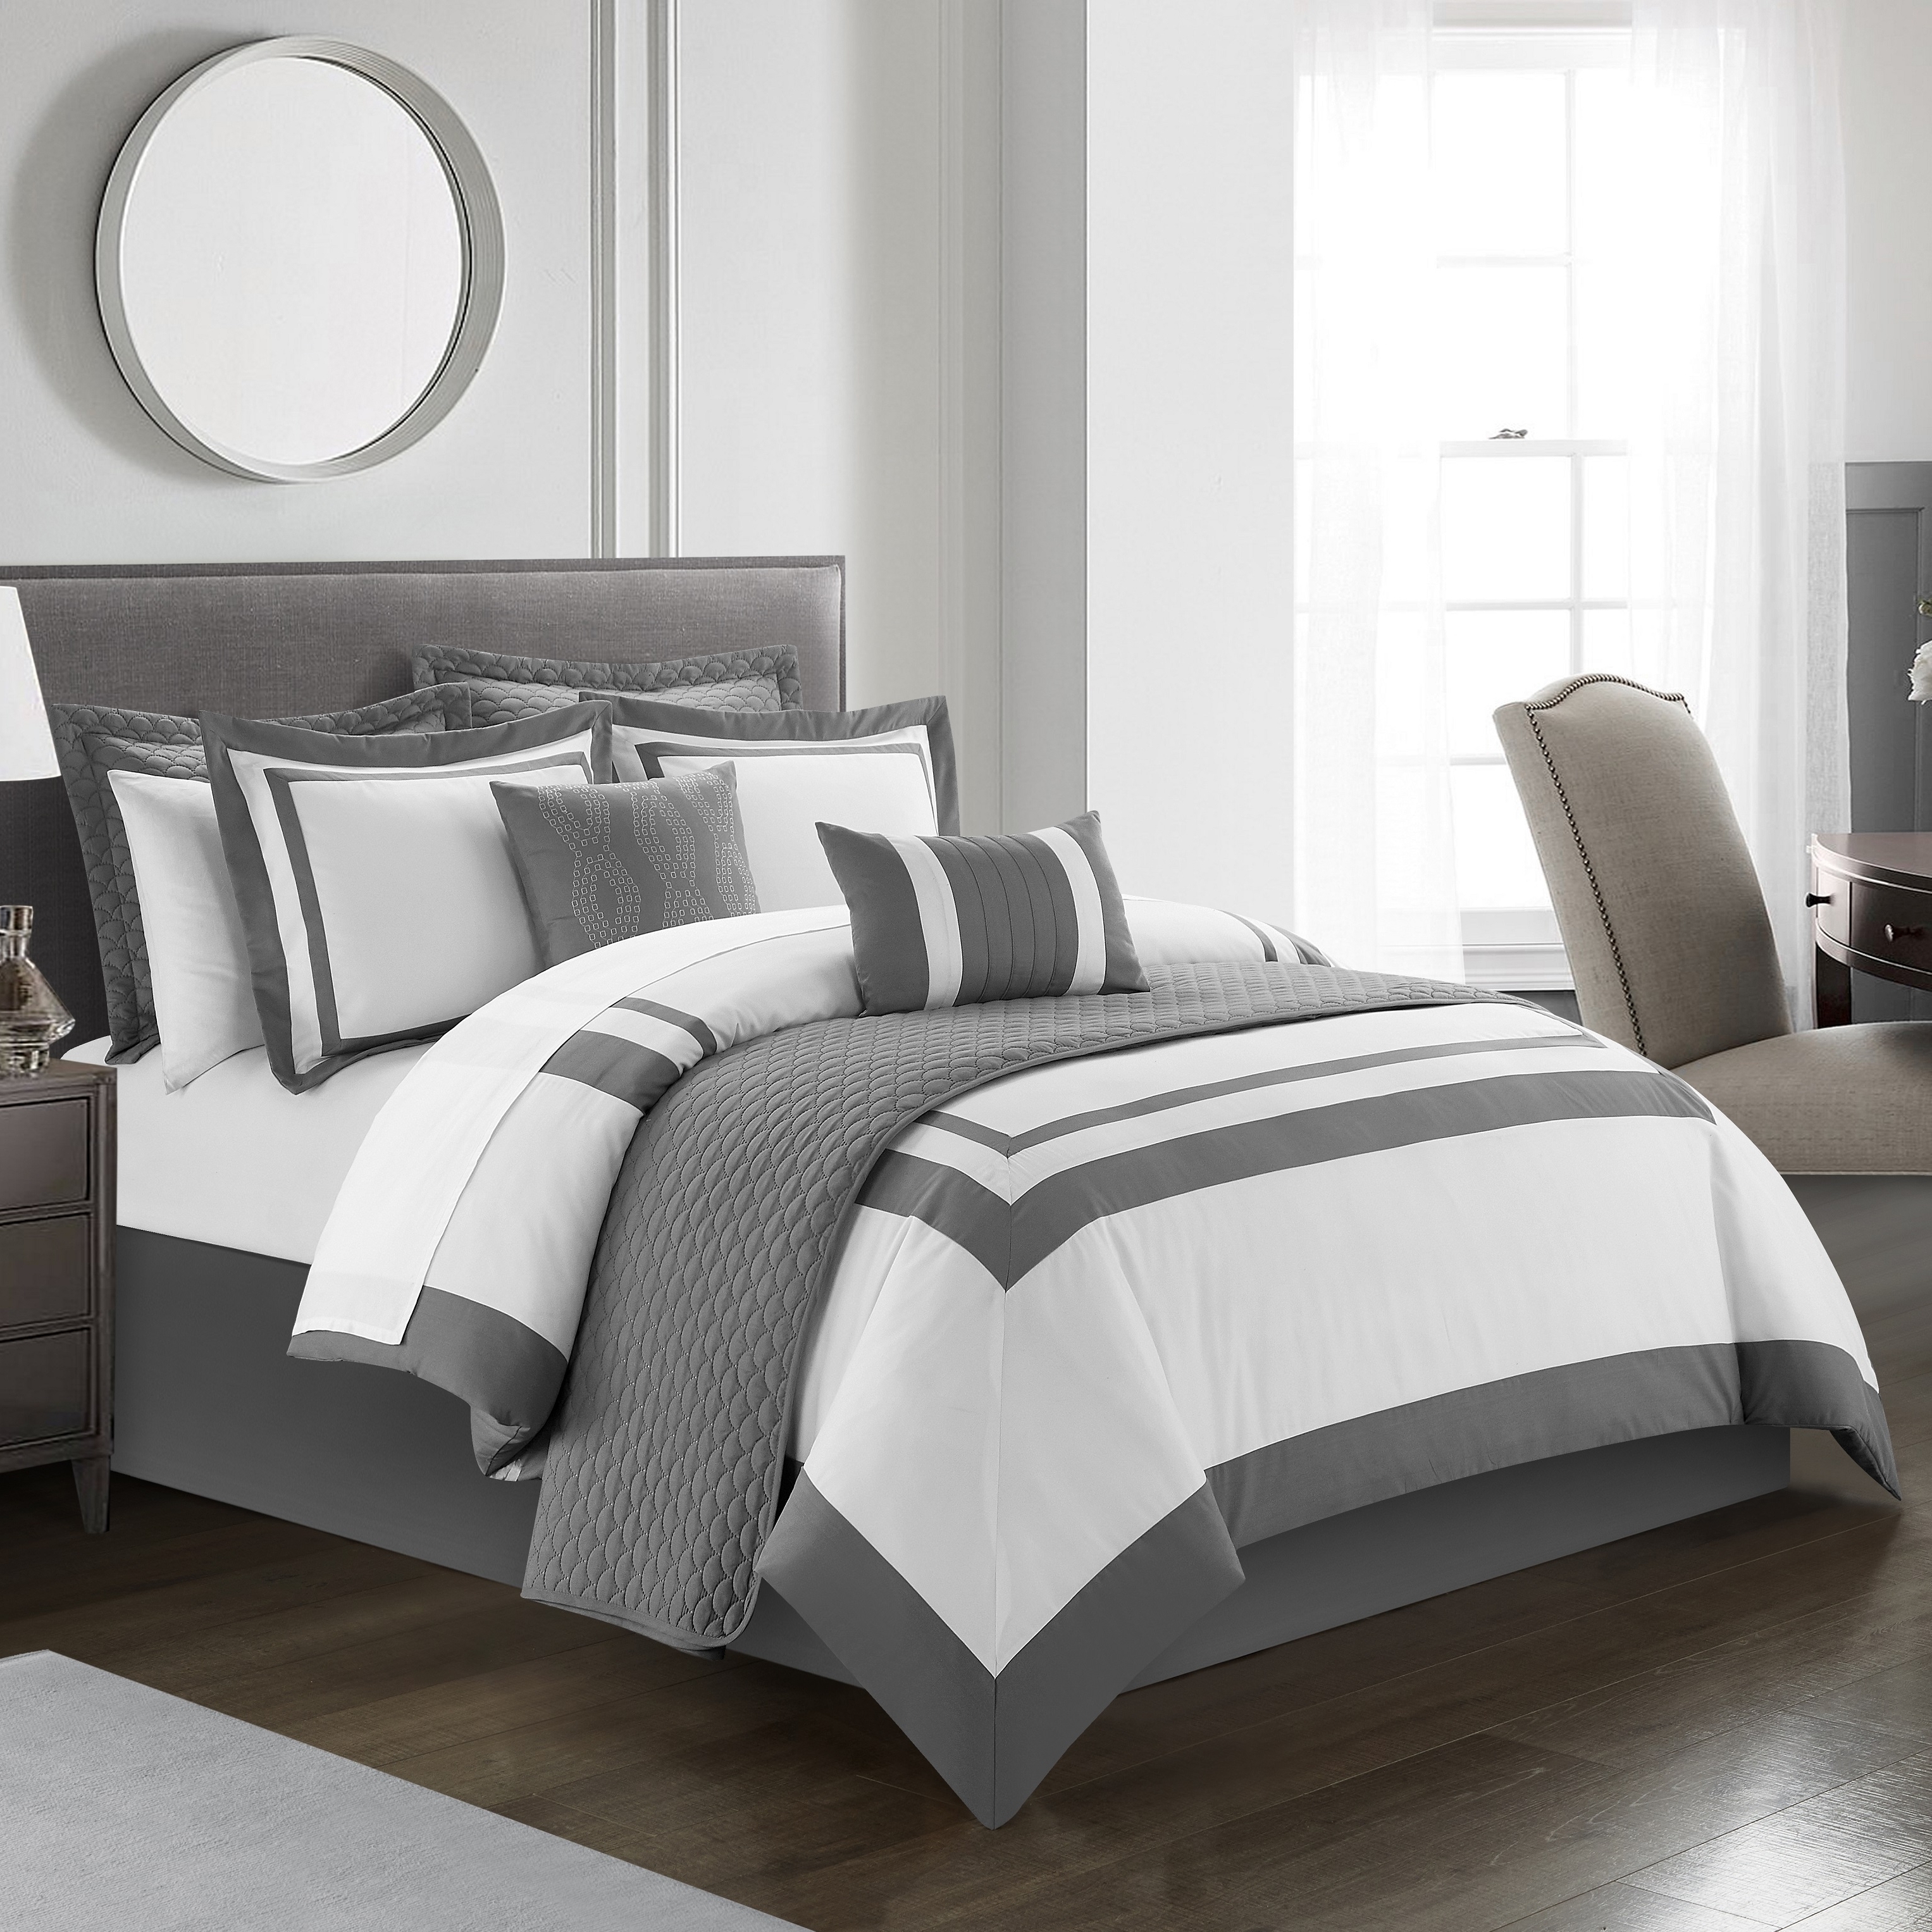 Hortense 8 Or 6 Piece Comforter And Quilt Set Hotel Collection - Grey, Twin - 6 Piece